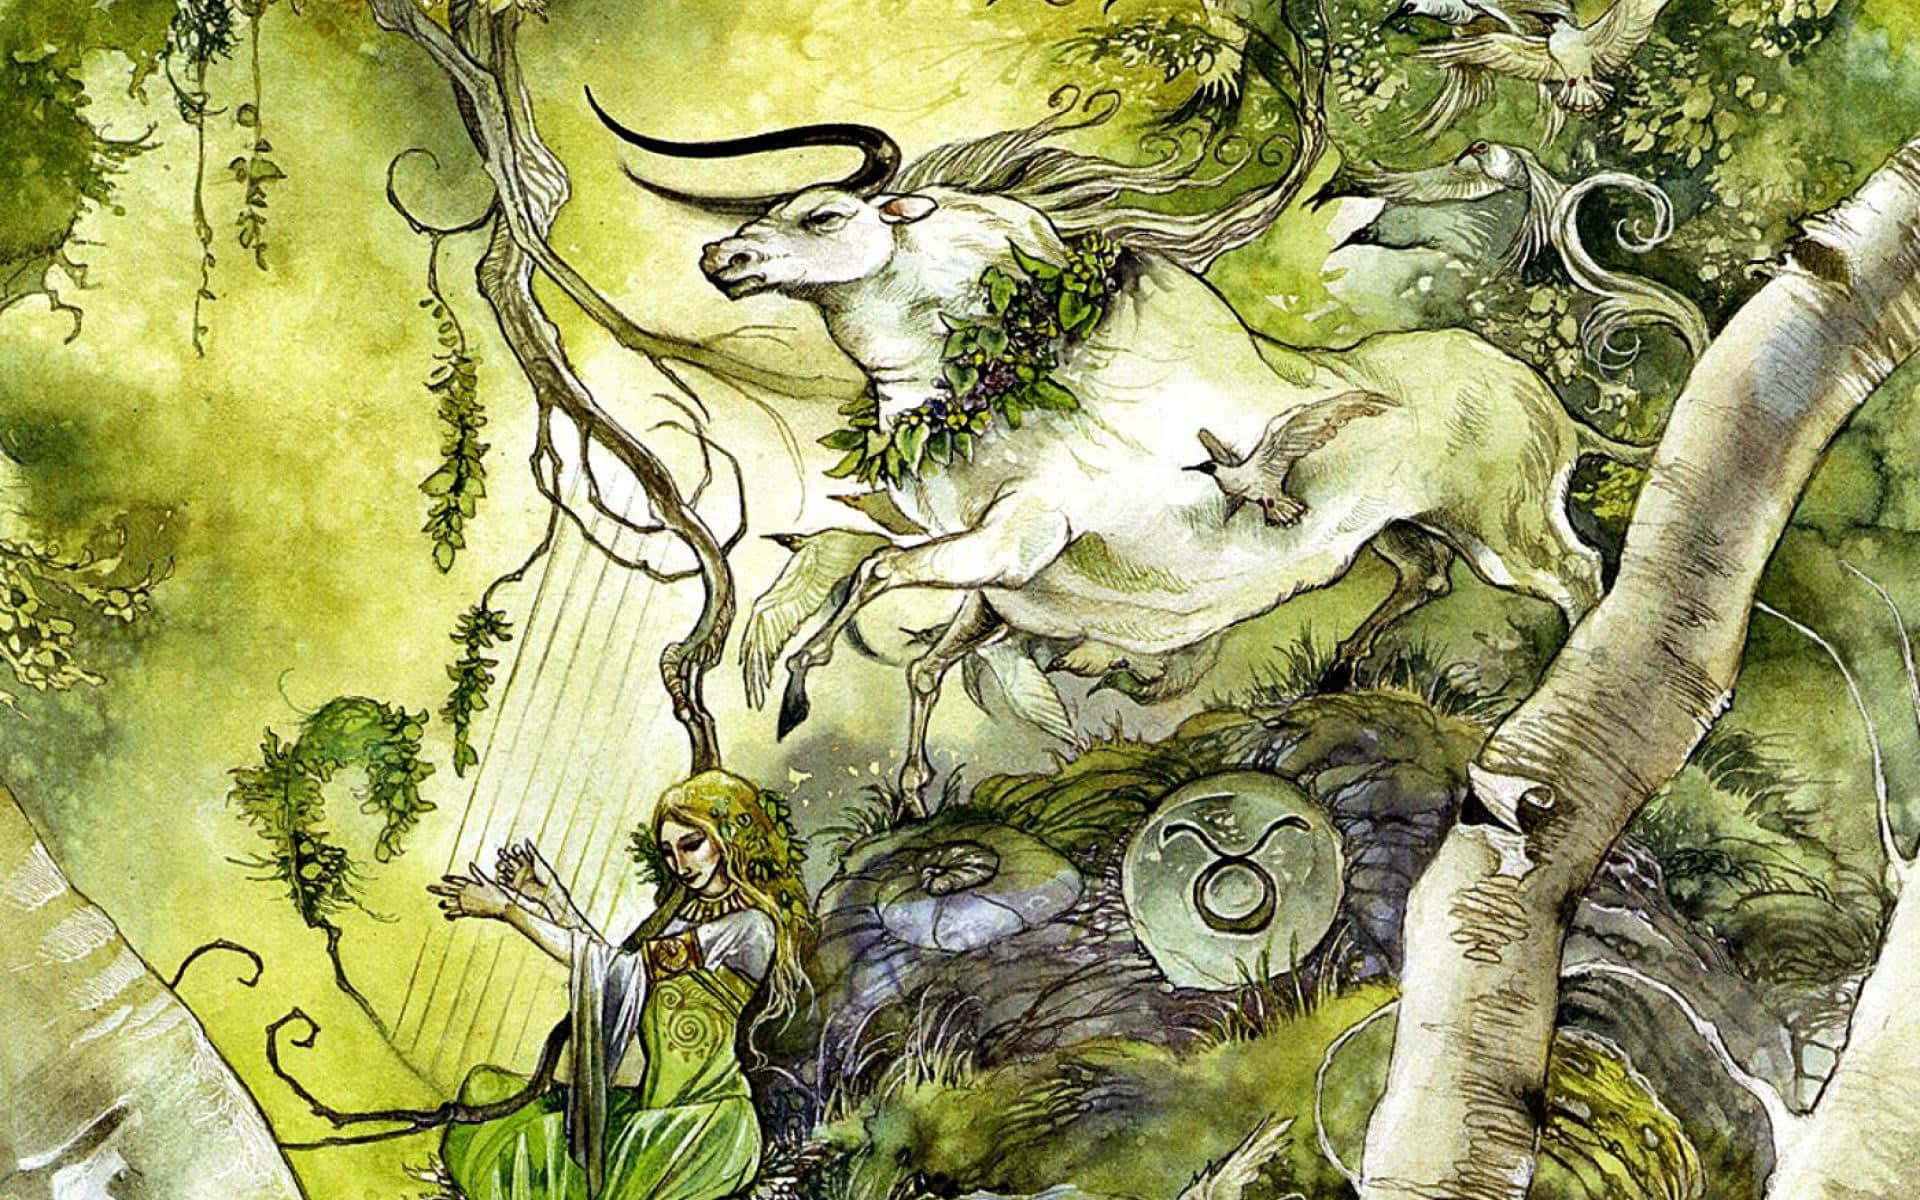 A Painting Of A Woman With A Goat In The Woods